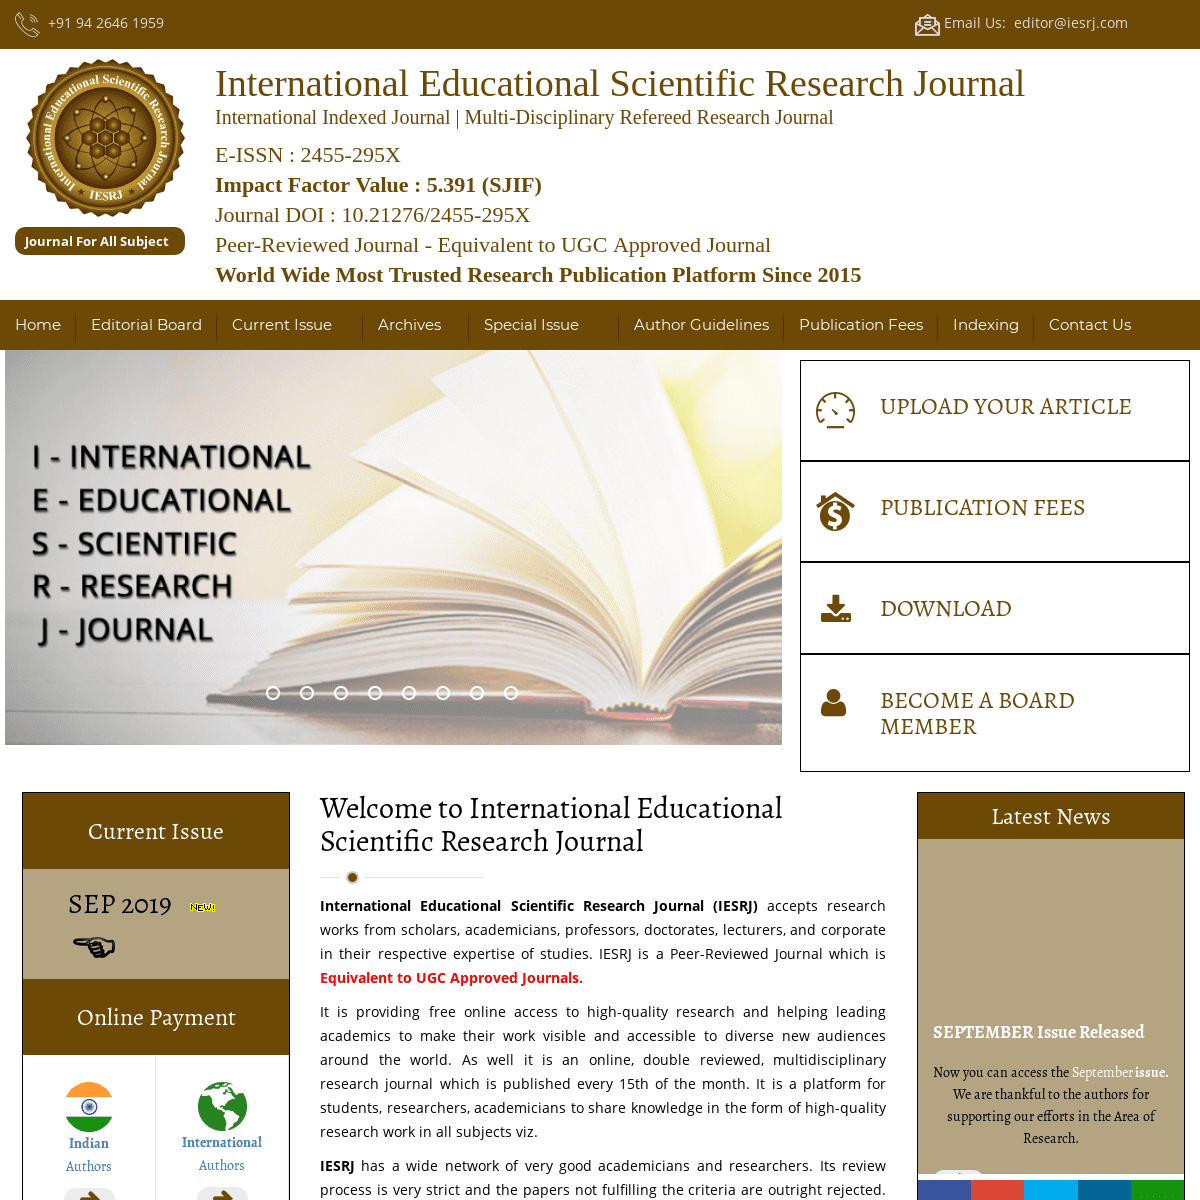 International Educational Scientific Research Journal - IESRJ ( Peer-Reviewed Monthly Research Journal and International Indexed